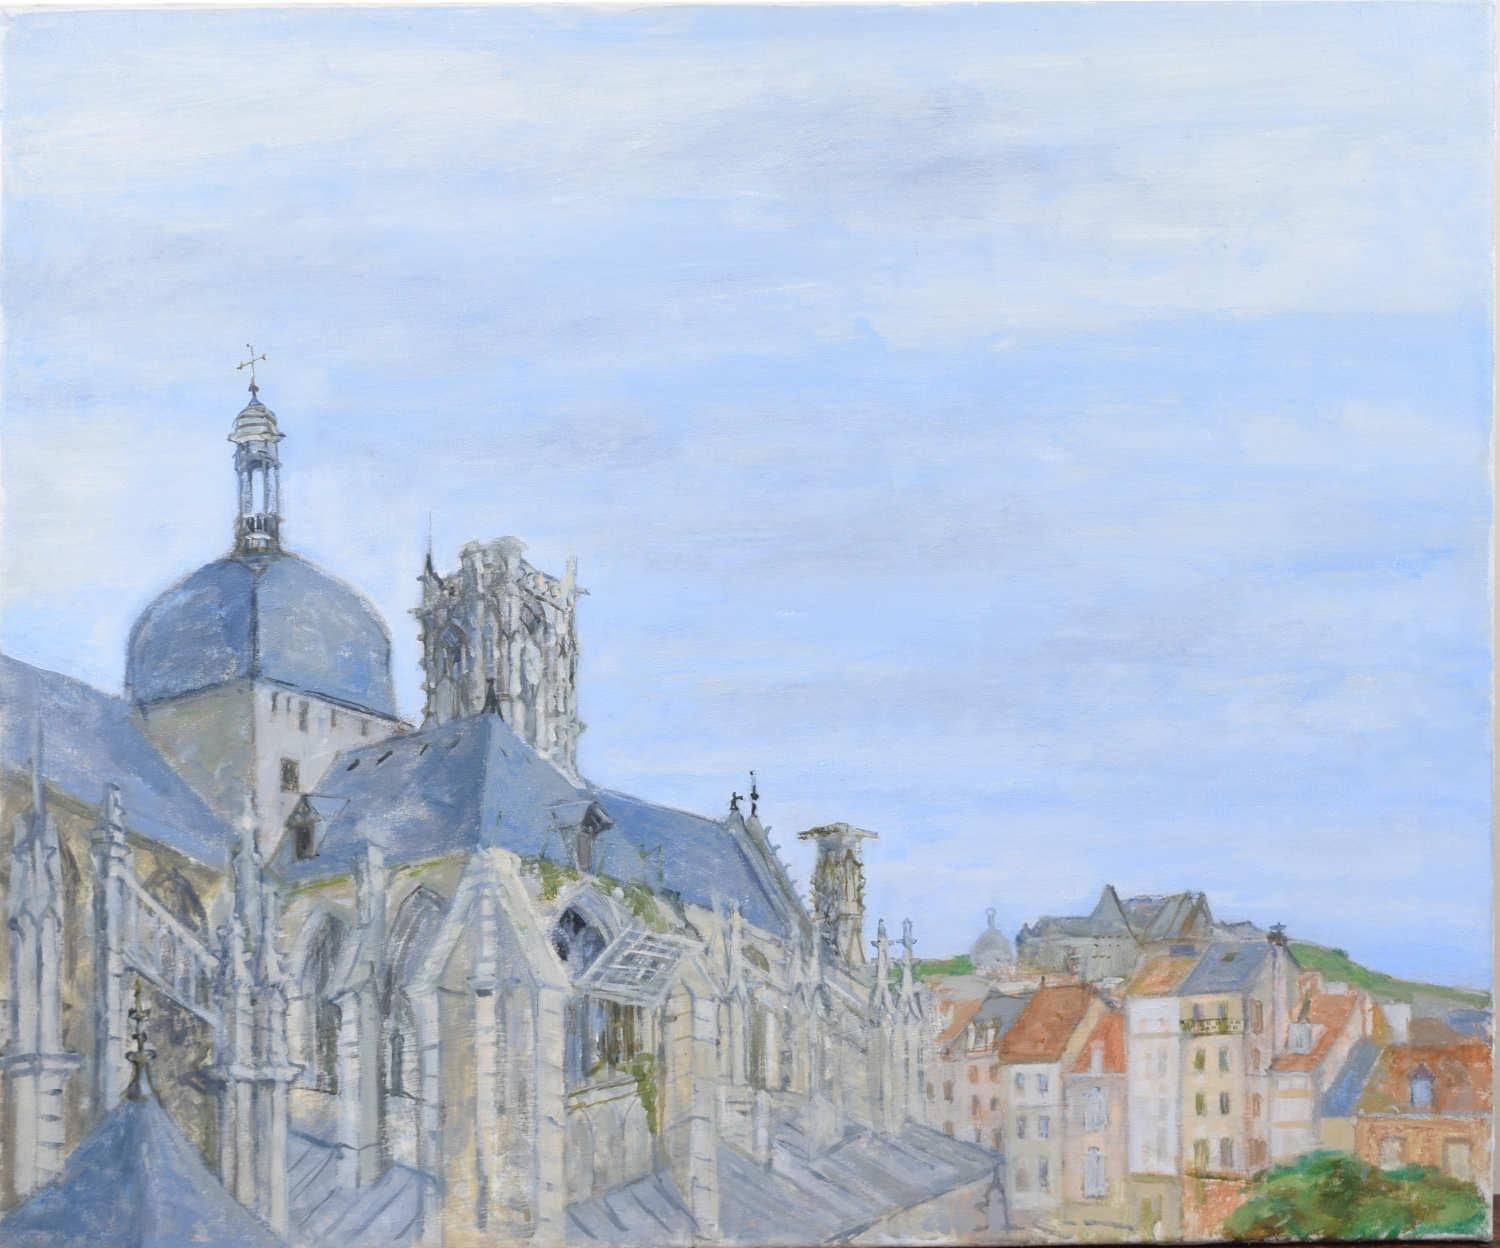 To see our other Modern British Art, scroll down to "More from this Seller" and below it click on "See all from this Seller" - or send us a message if you cannot find the artist you want.

Richard Beer (1928 - 2017)
Église Saint-Jacques de Dieppe,